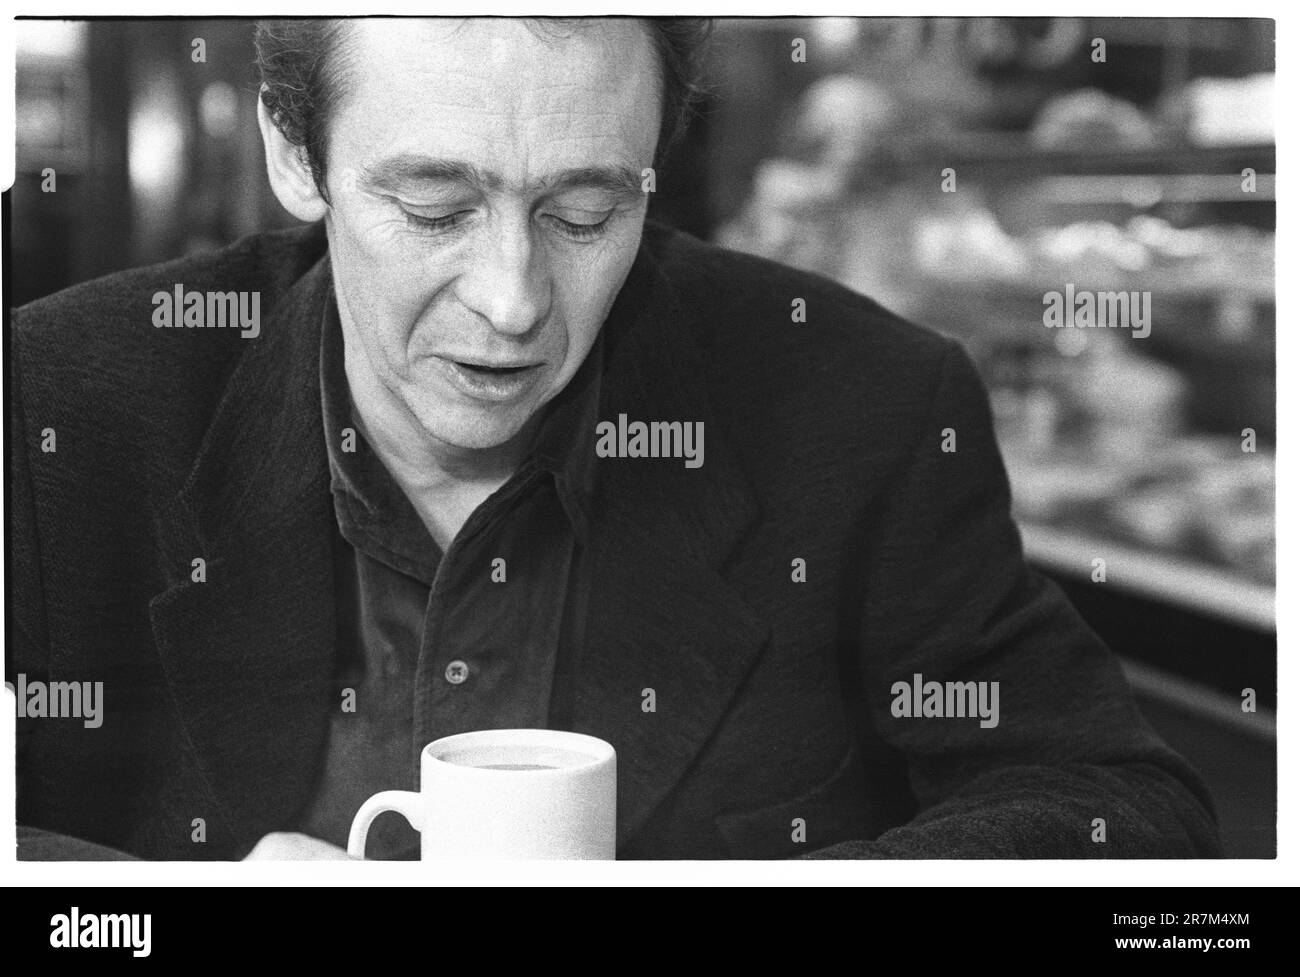 PAUL WHITEHOUSE, COMEDIAN, YOUNG, LONDON, 1996: Interview portrait of comedian and actor Paul Whitehouse at a small cafe in North London, England, UK during Fast Show filming in November 1996. This was a huge breakthrough year for this modern British comedy legend. Photo: Rob Watkins Stock Photo